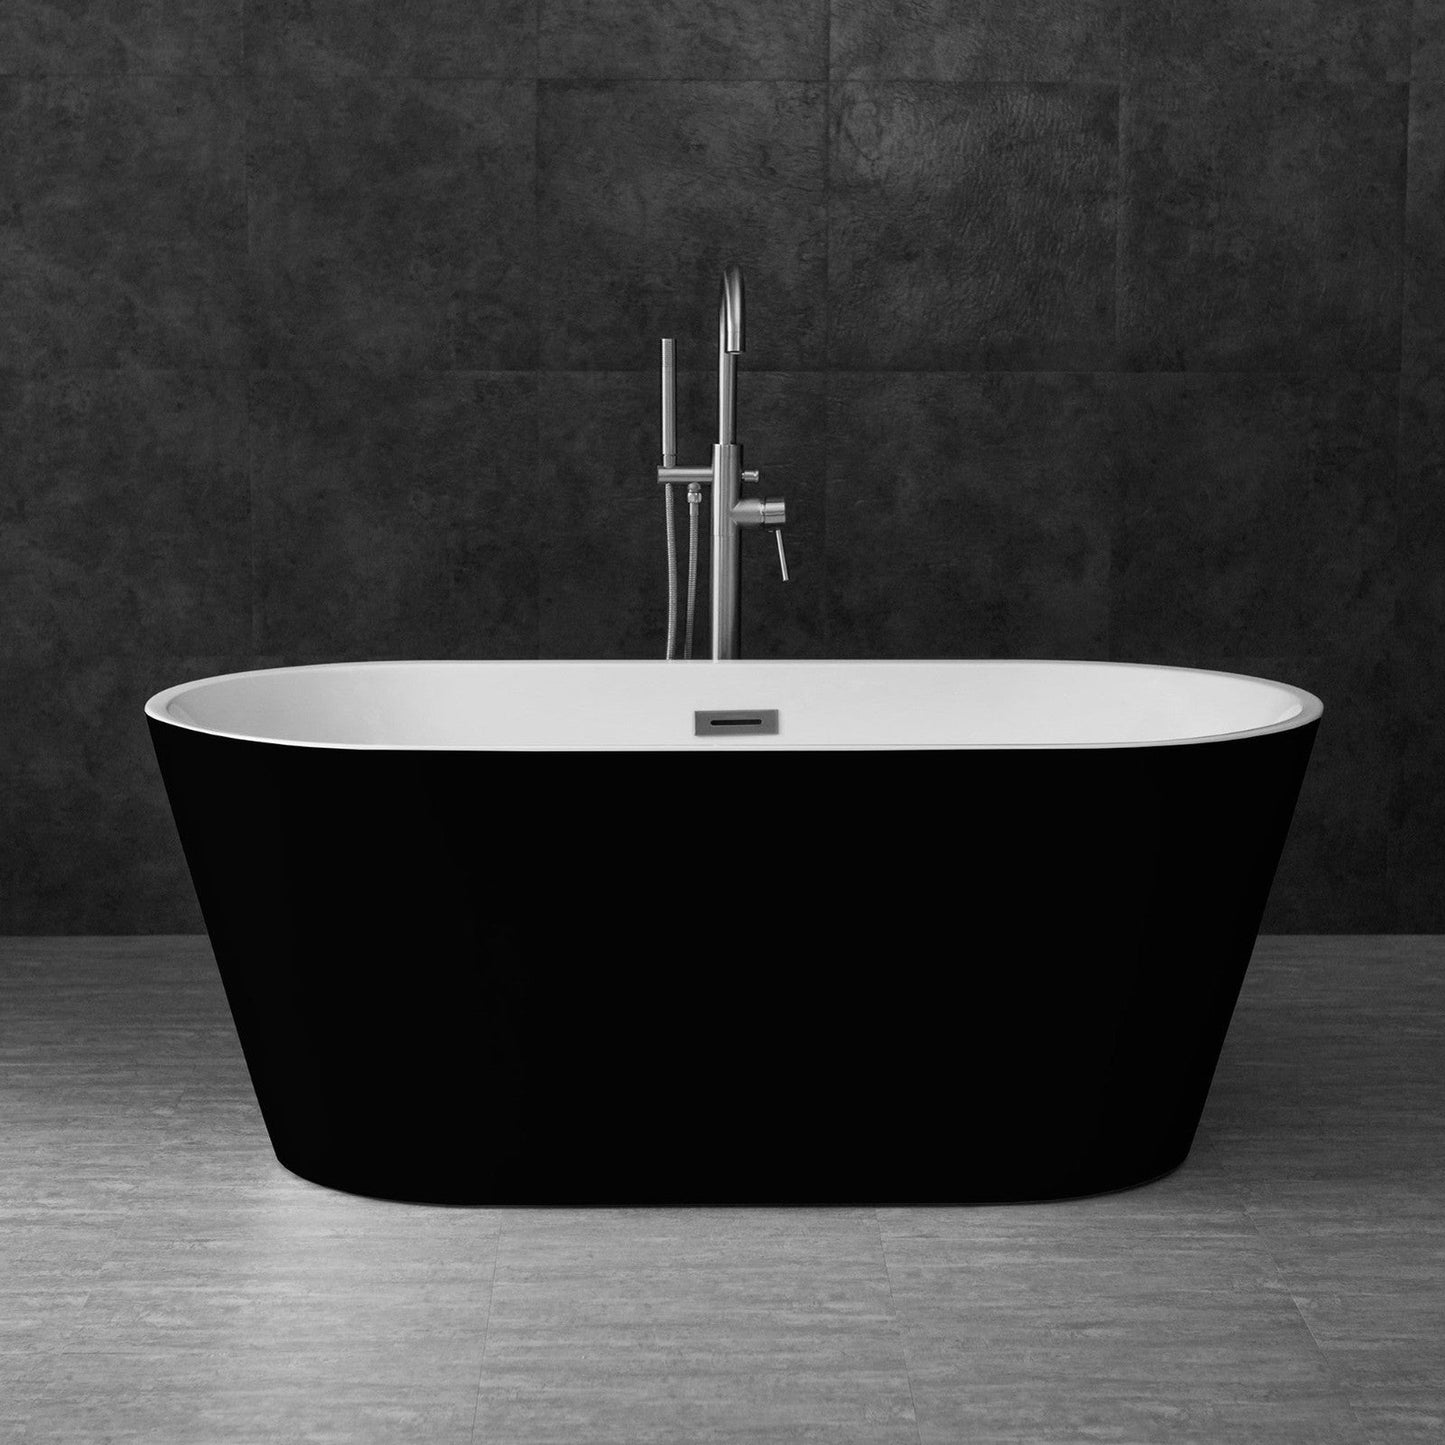 WoodBridge 59" Black Acrylic Freestanding Contemporary Soaking Bathtub With Brushed Nickel Drain, Overflow, F0070BNSQ Tub Filler and Caddy Tray